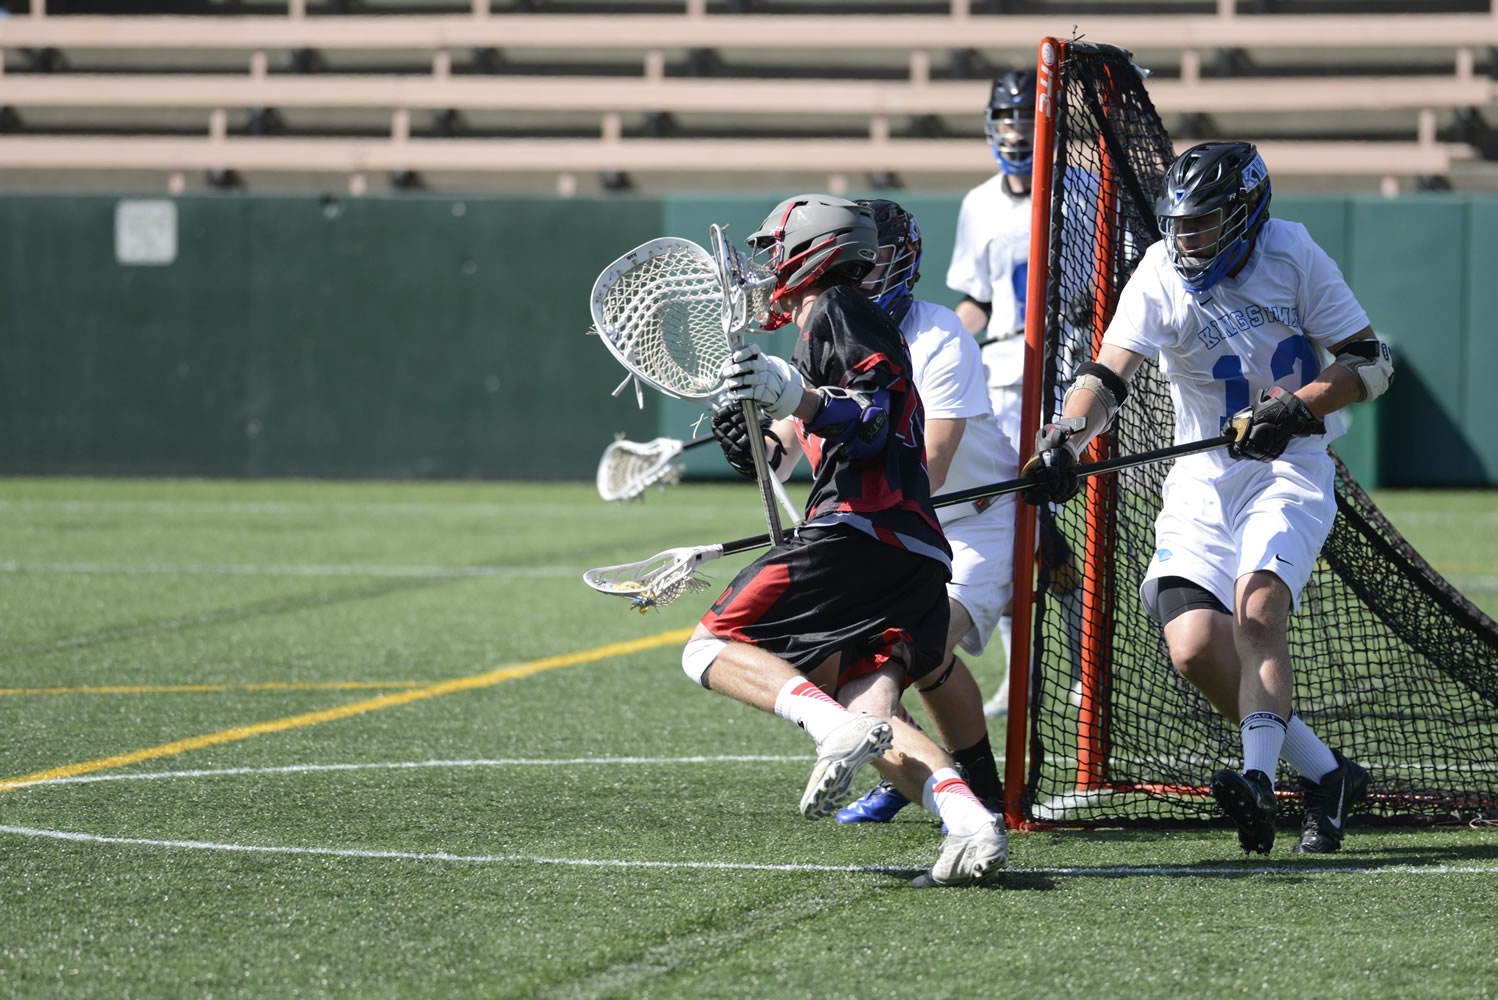 King’s Way Lacrosse continues to climb - The Columbian